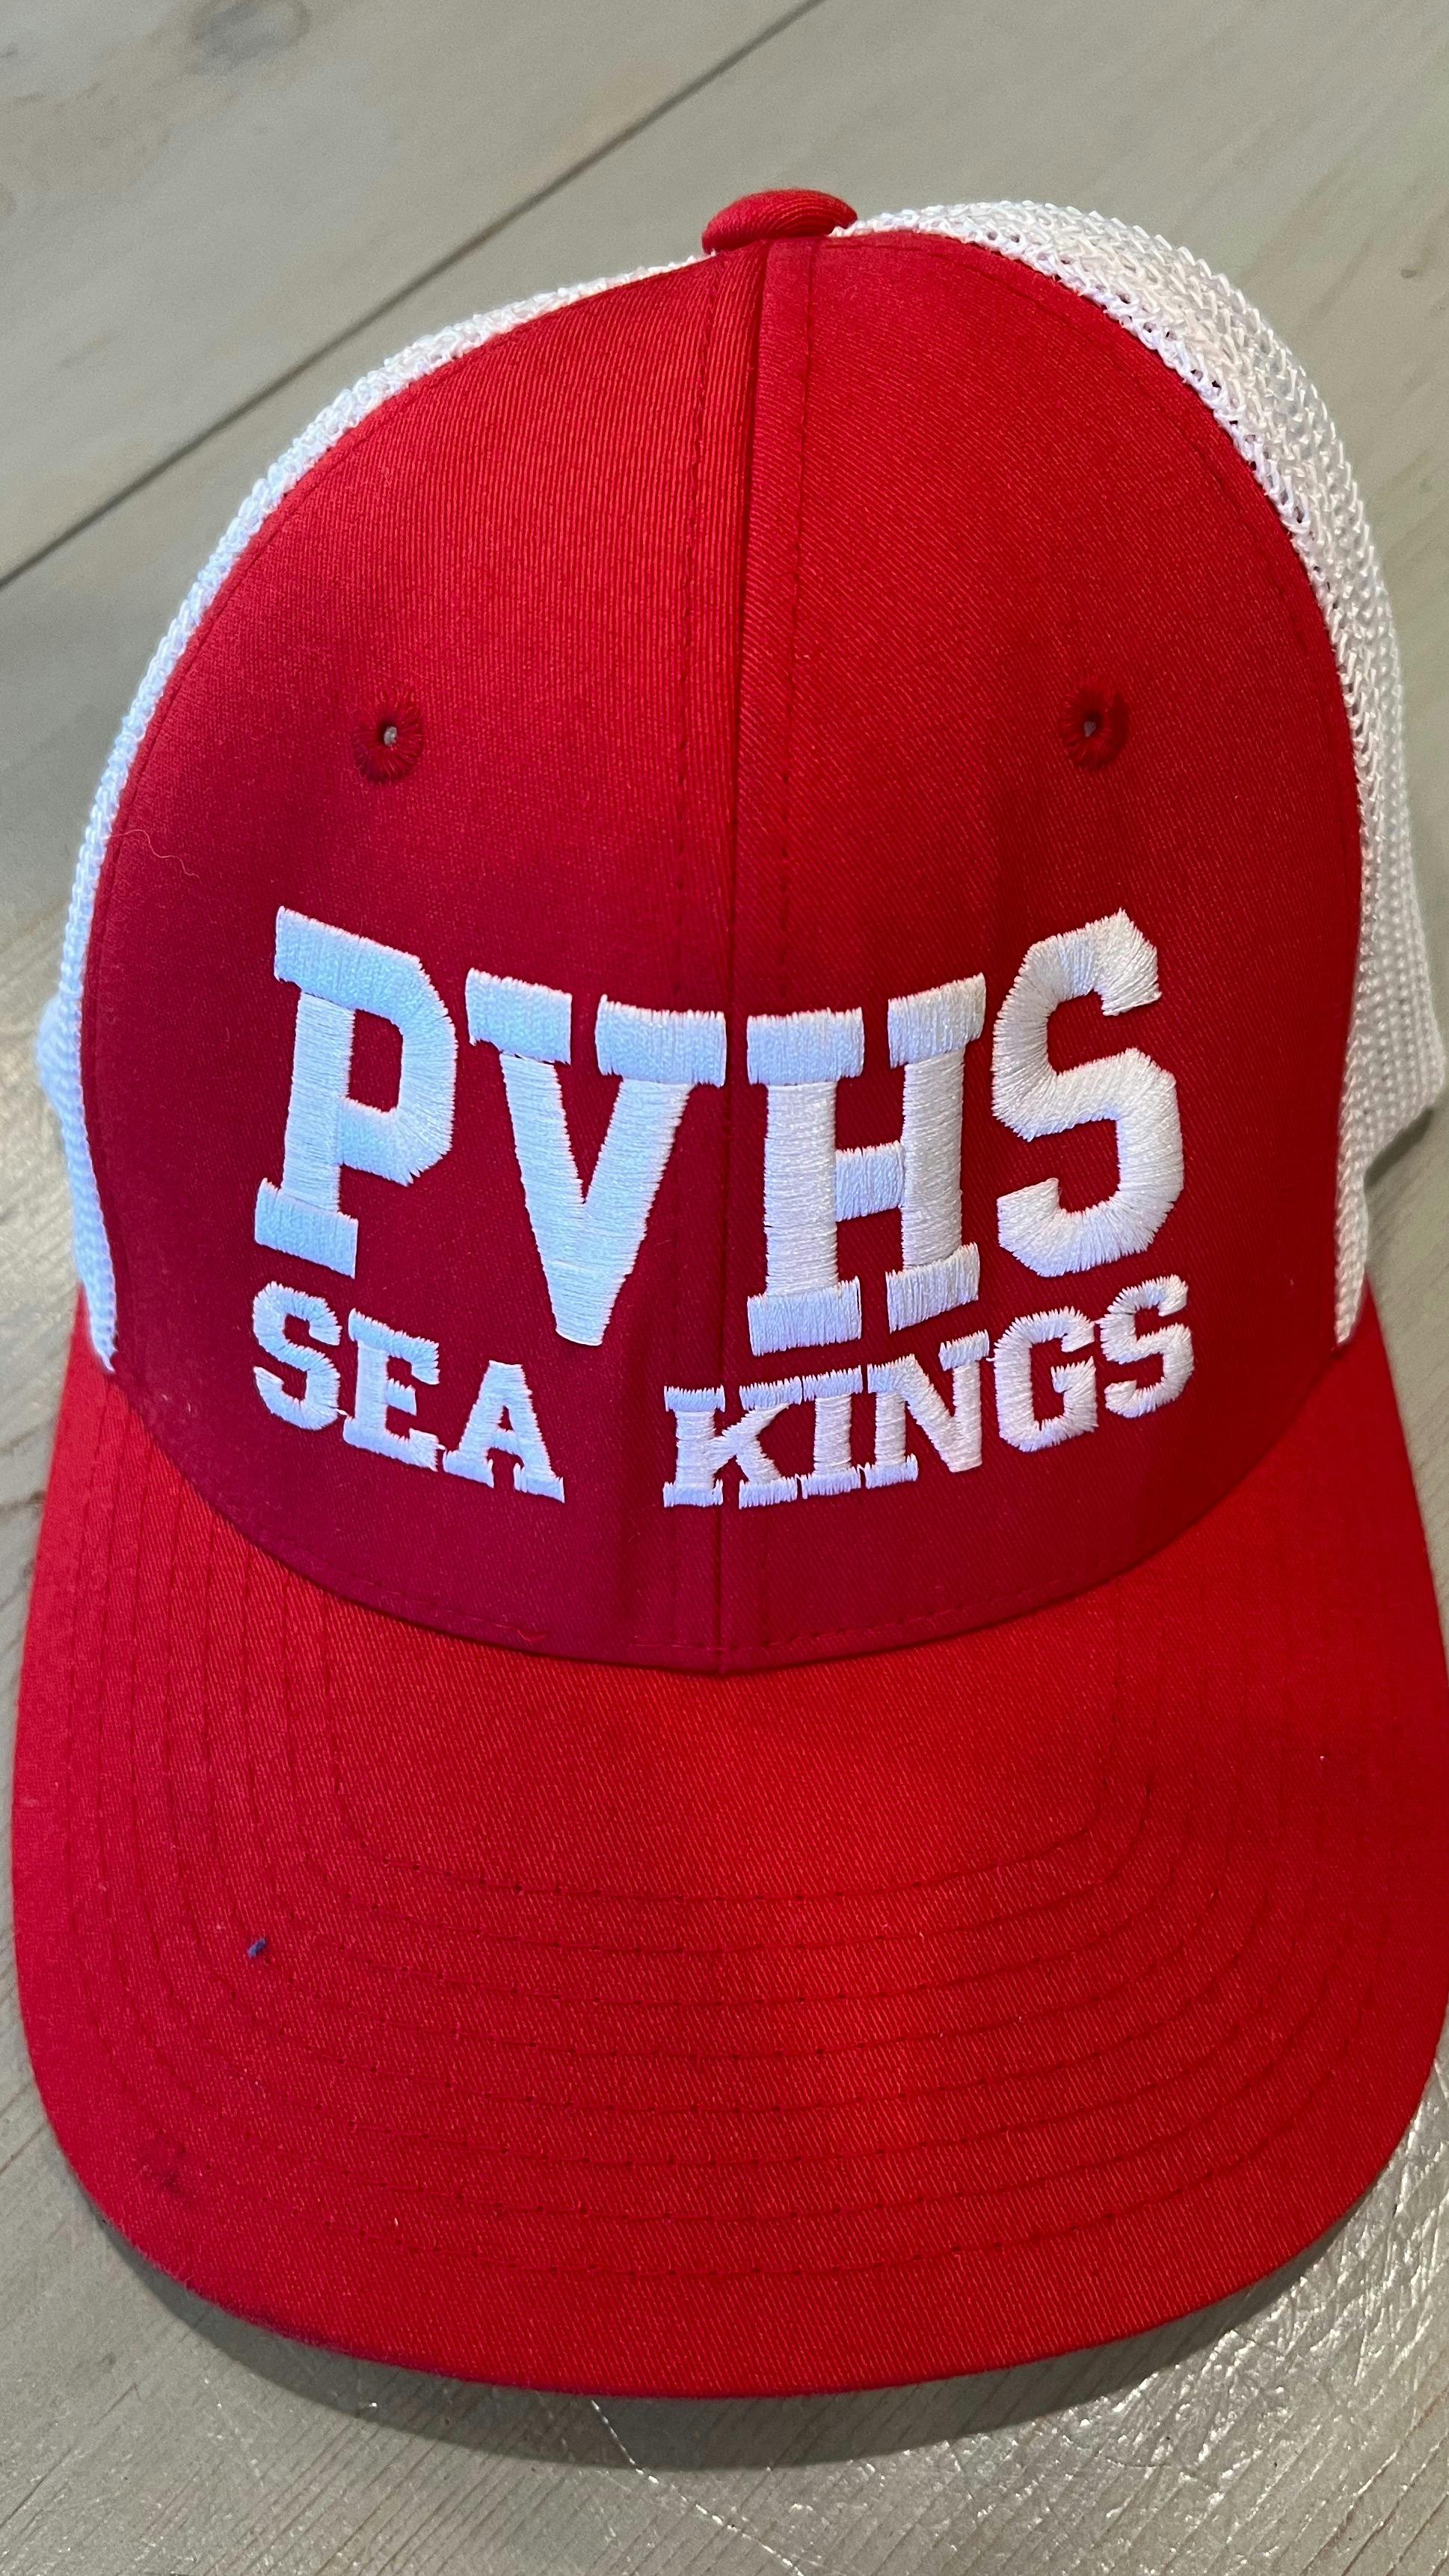 PVHS Soccer Merchandise and Apparel Pack